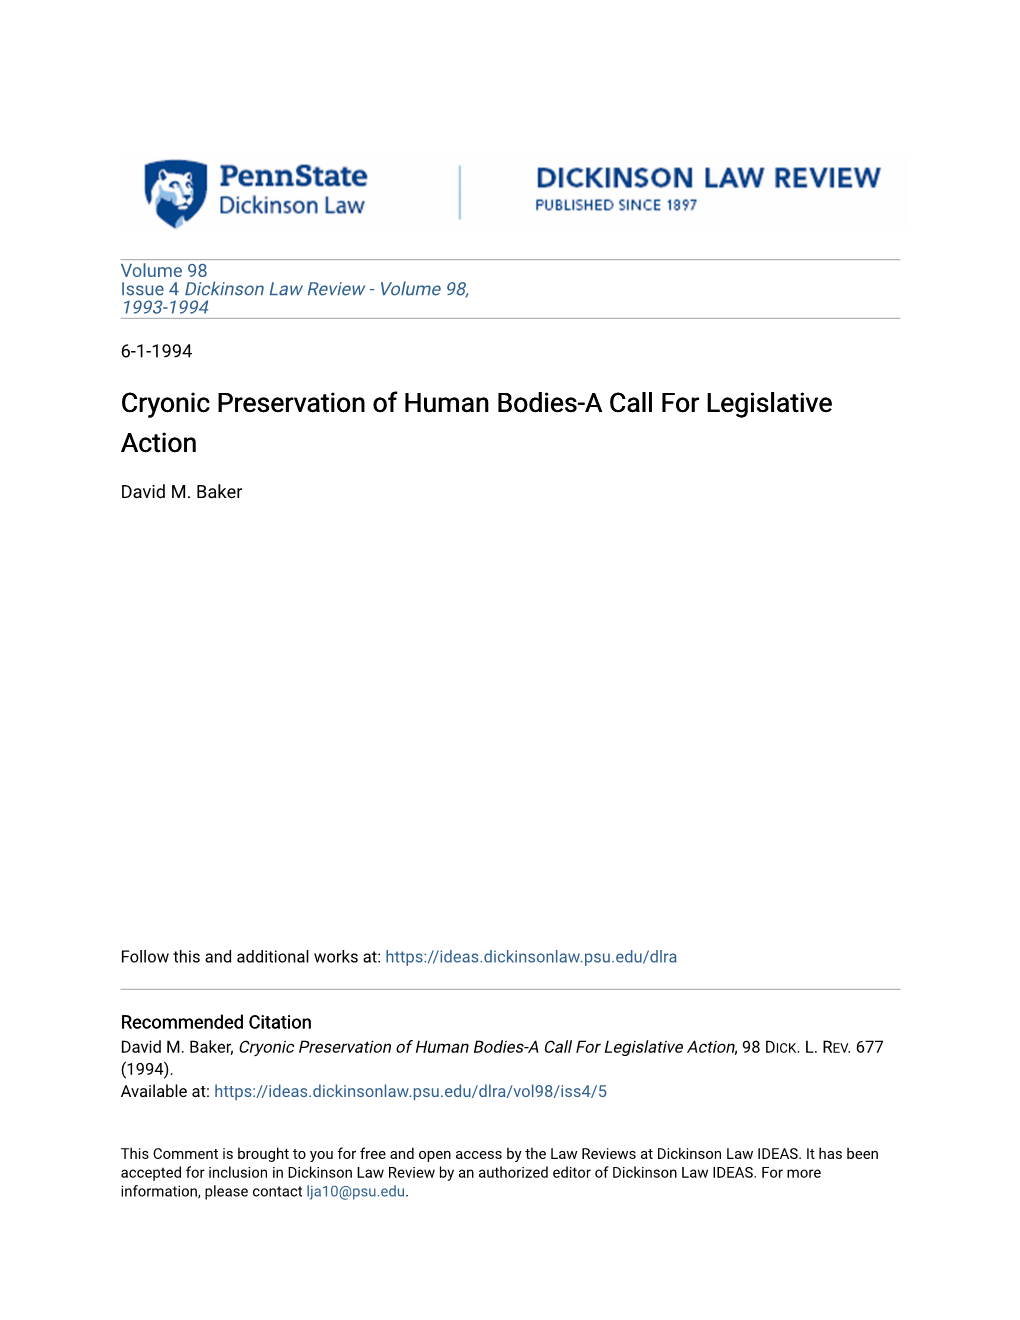 Cryonic Preservation of Human Bodies-A Call for Legislative Action